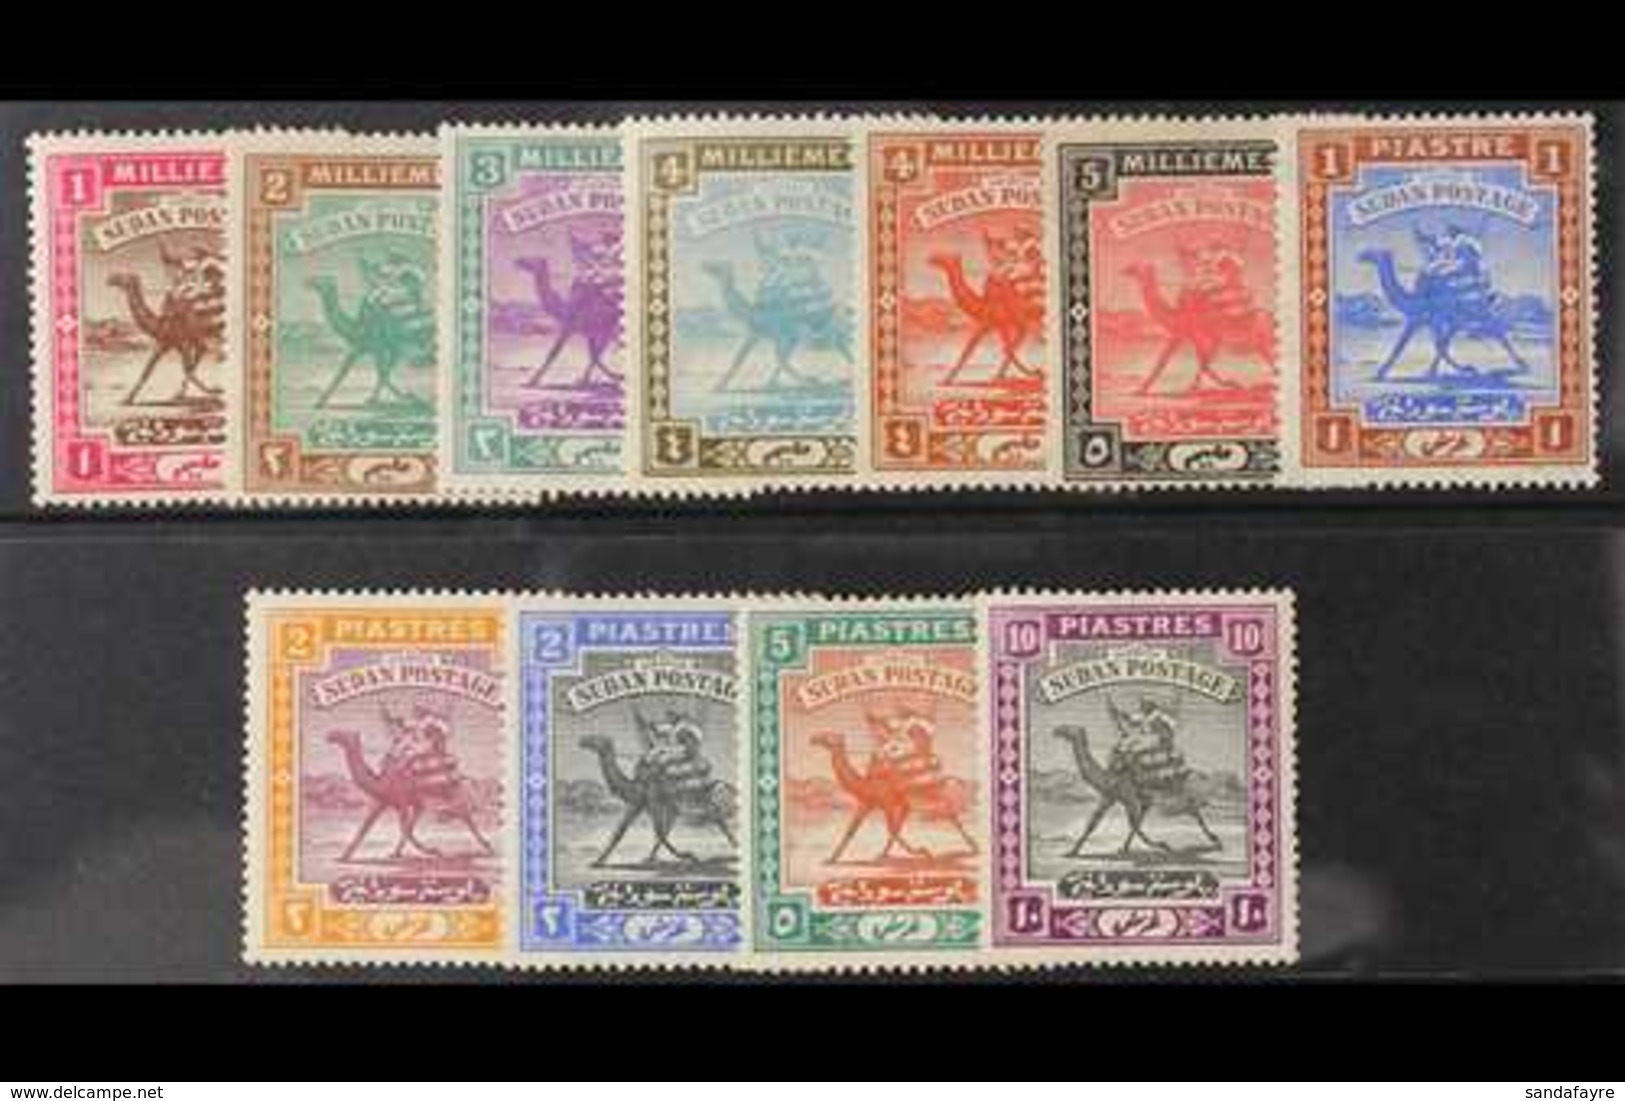 1902-21  "Arab Postman" Complete Set, Watermark Star And Crescent, SG 18/28, Fine Mint. (11 Stamps) For More Images, Ple - Soudan (...-1951)